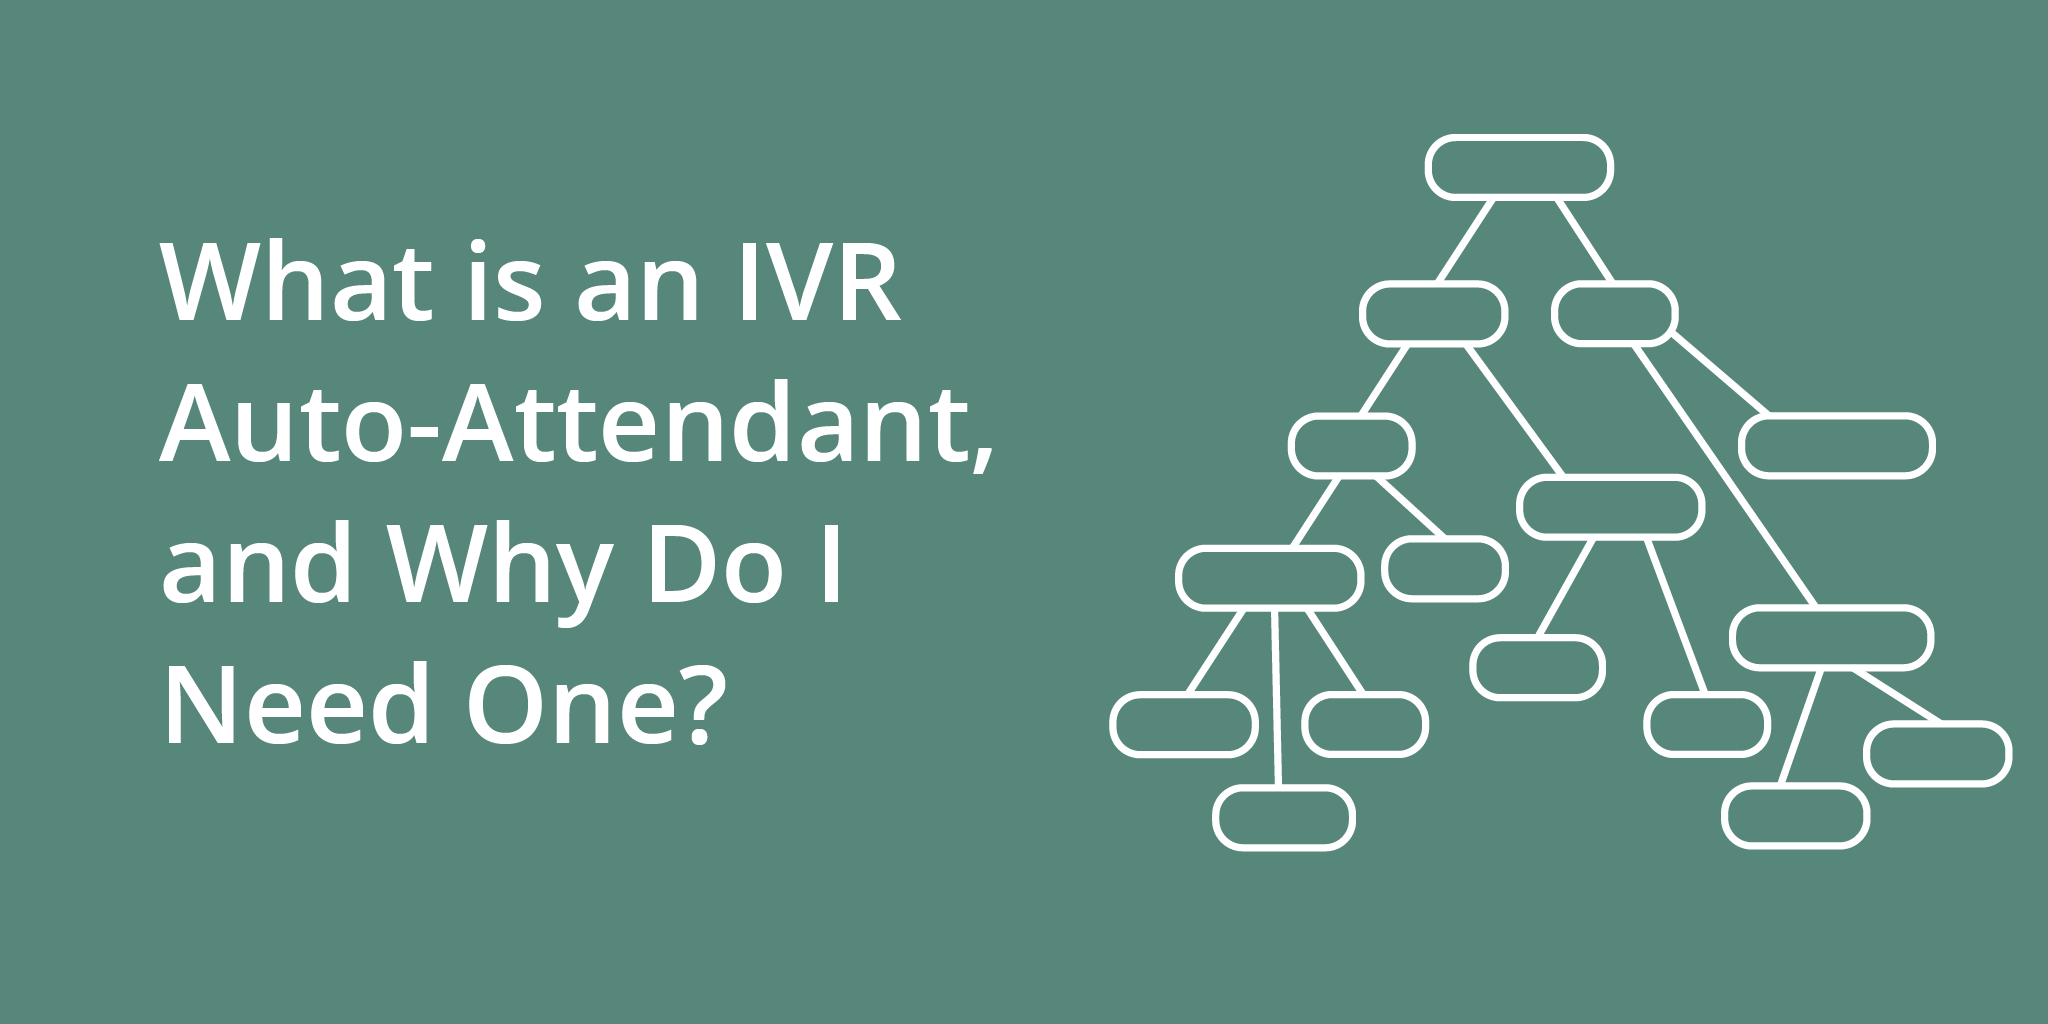 What is an IVR Auto-Attendant, and Why Do I Need One? | Telephones for business